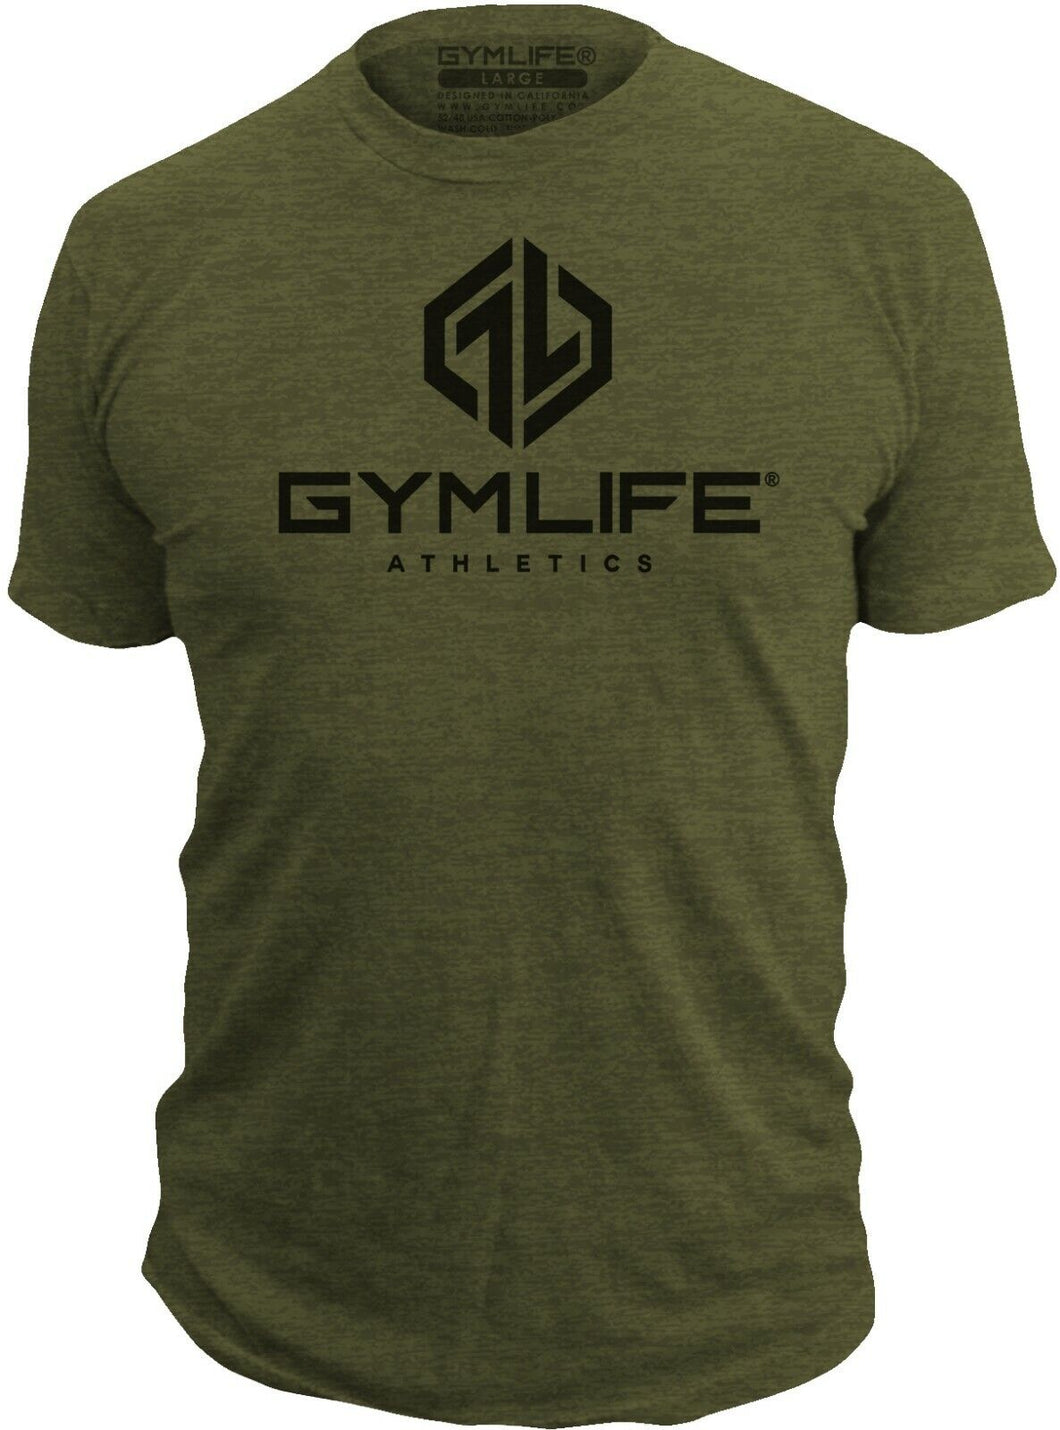 GYM LIFE - Power Up - Mens Athletic 52/48 Premium T-Shirt, Made of USA, Olive Drab Green